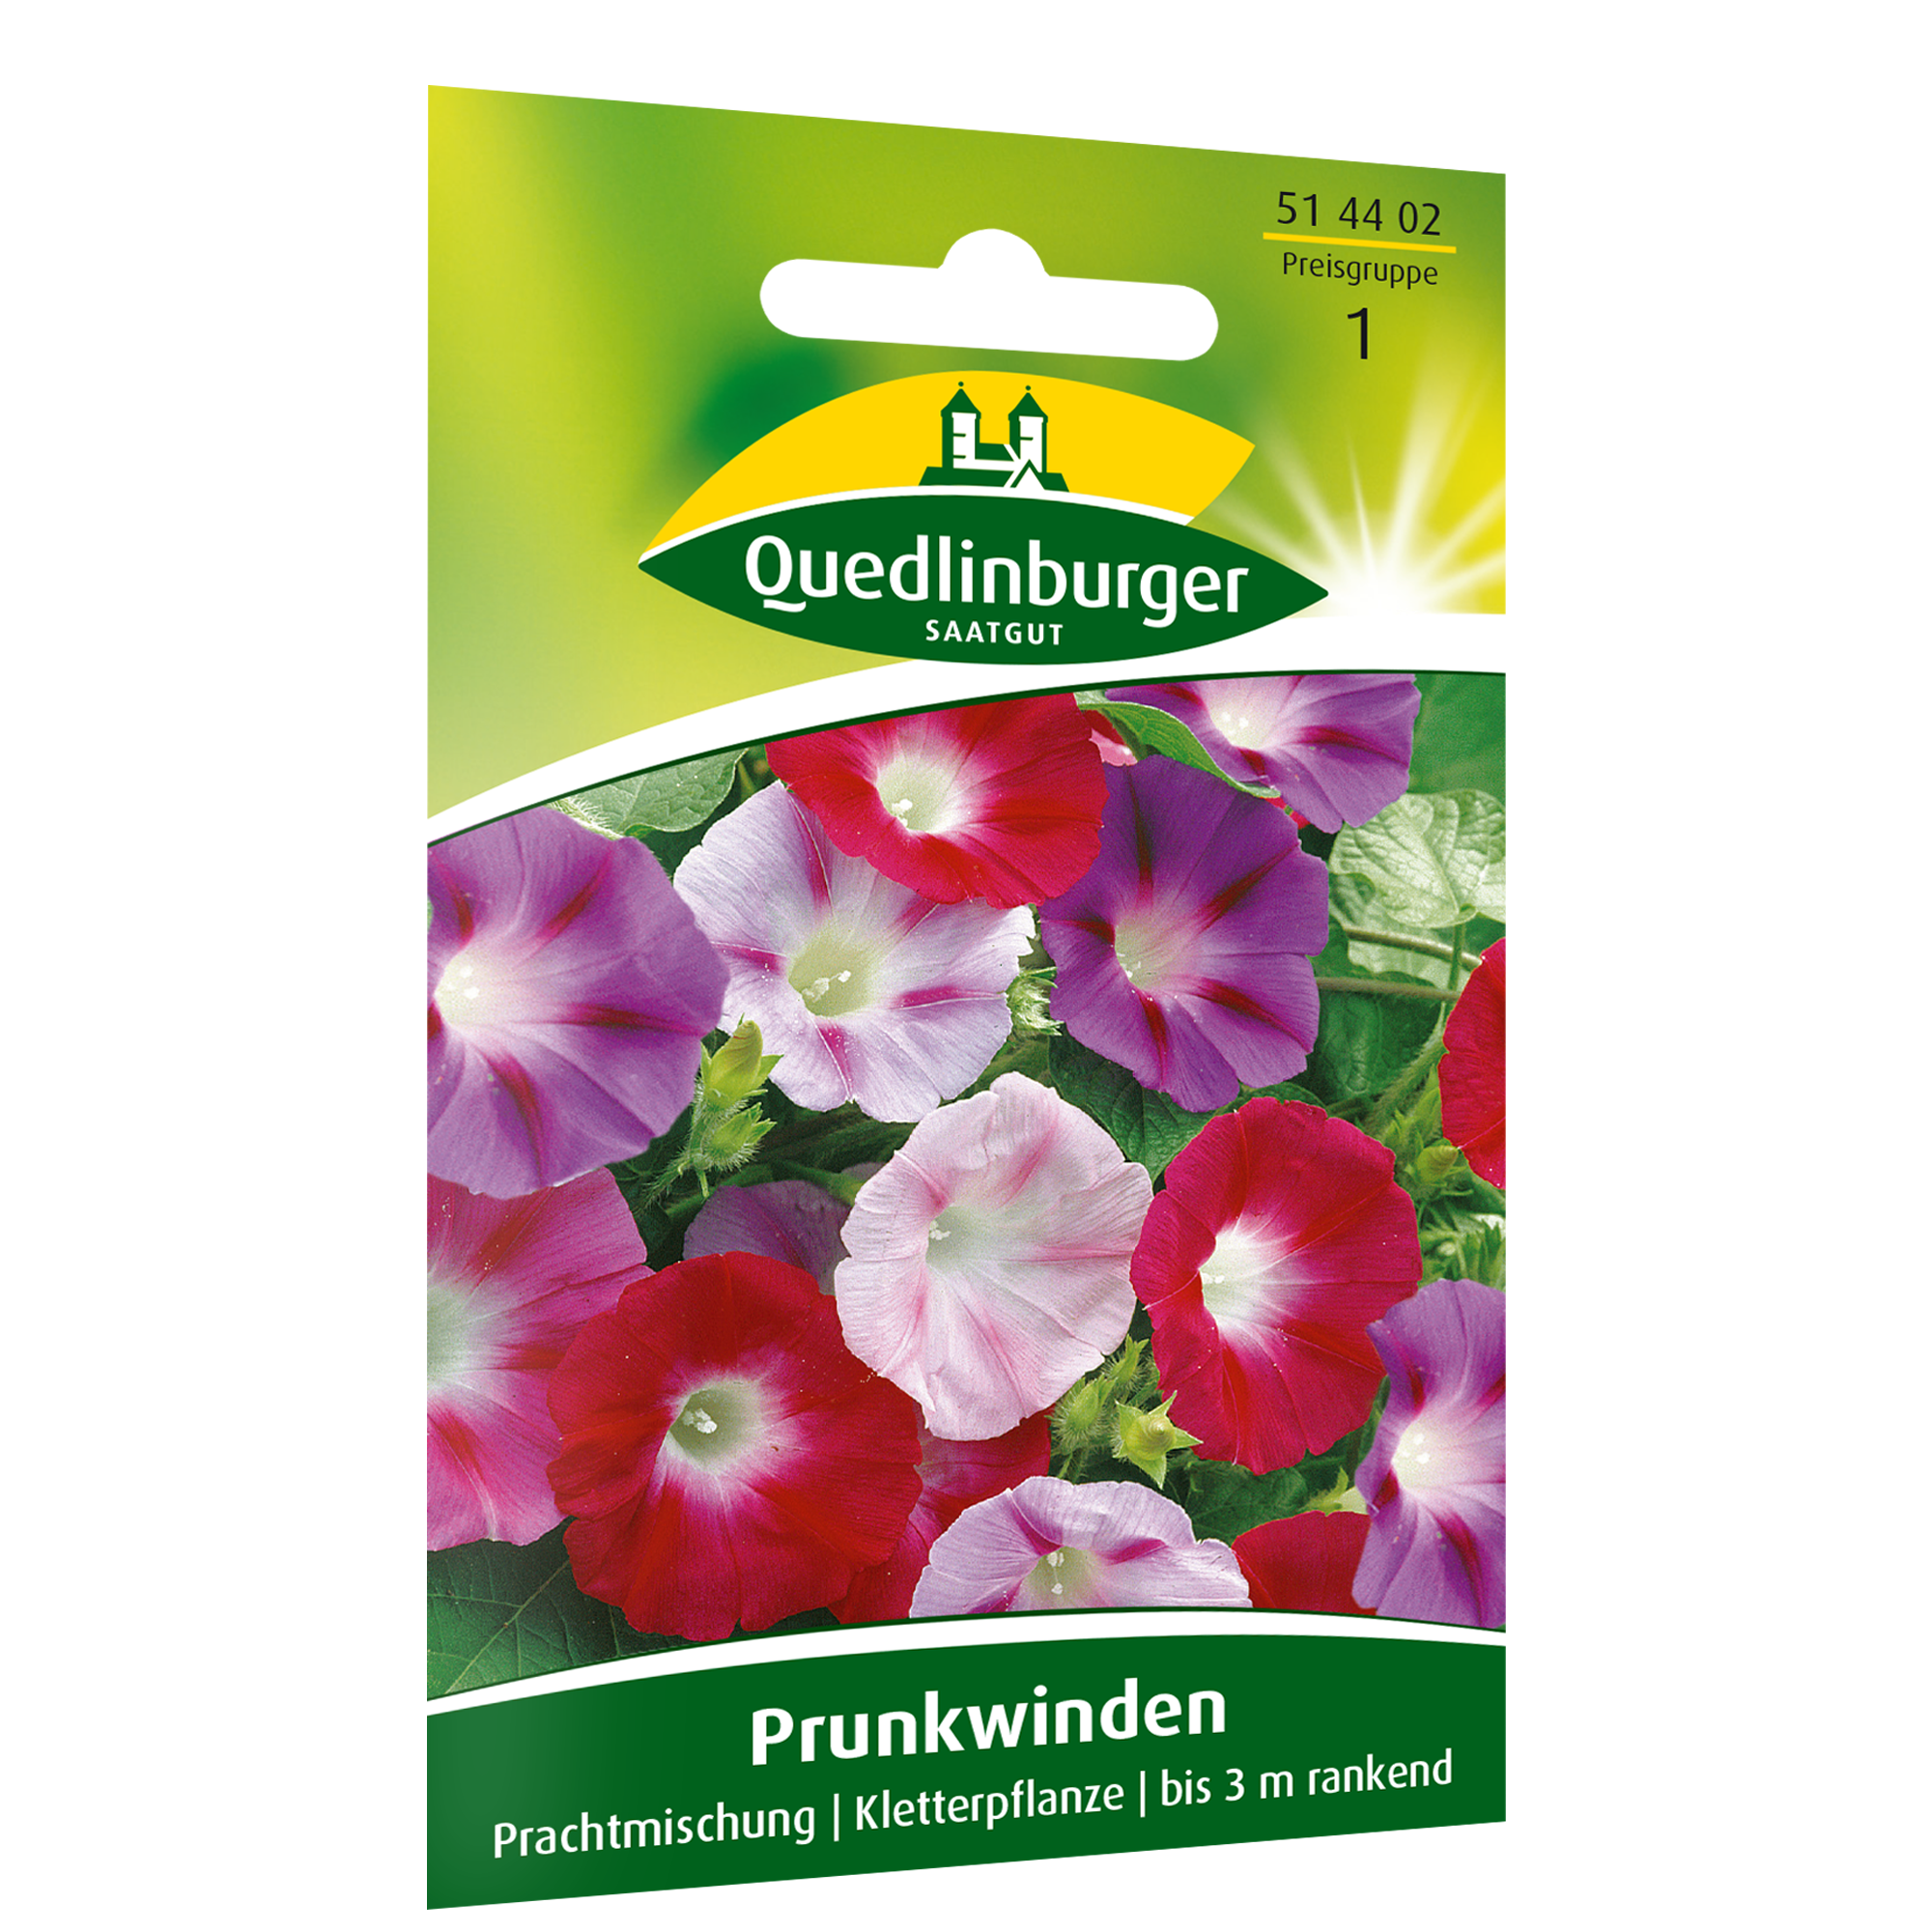 Prunkwinde Prachtmischung + product picture